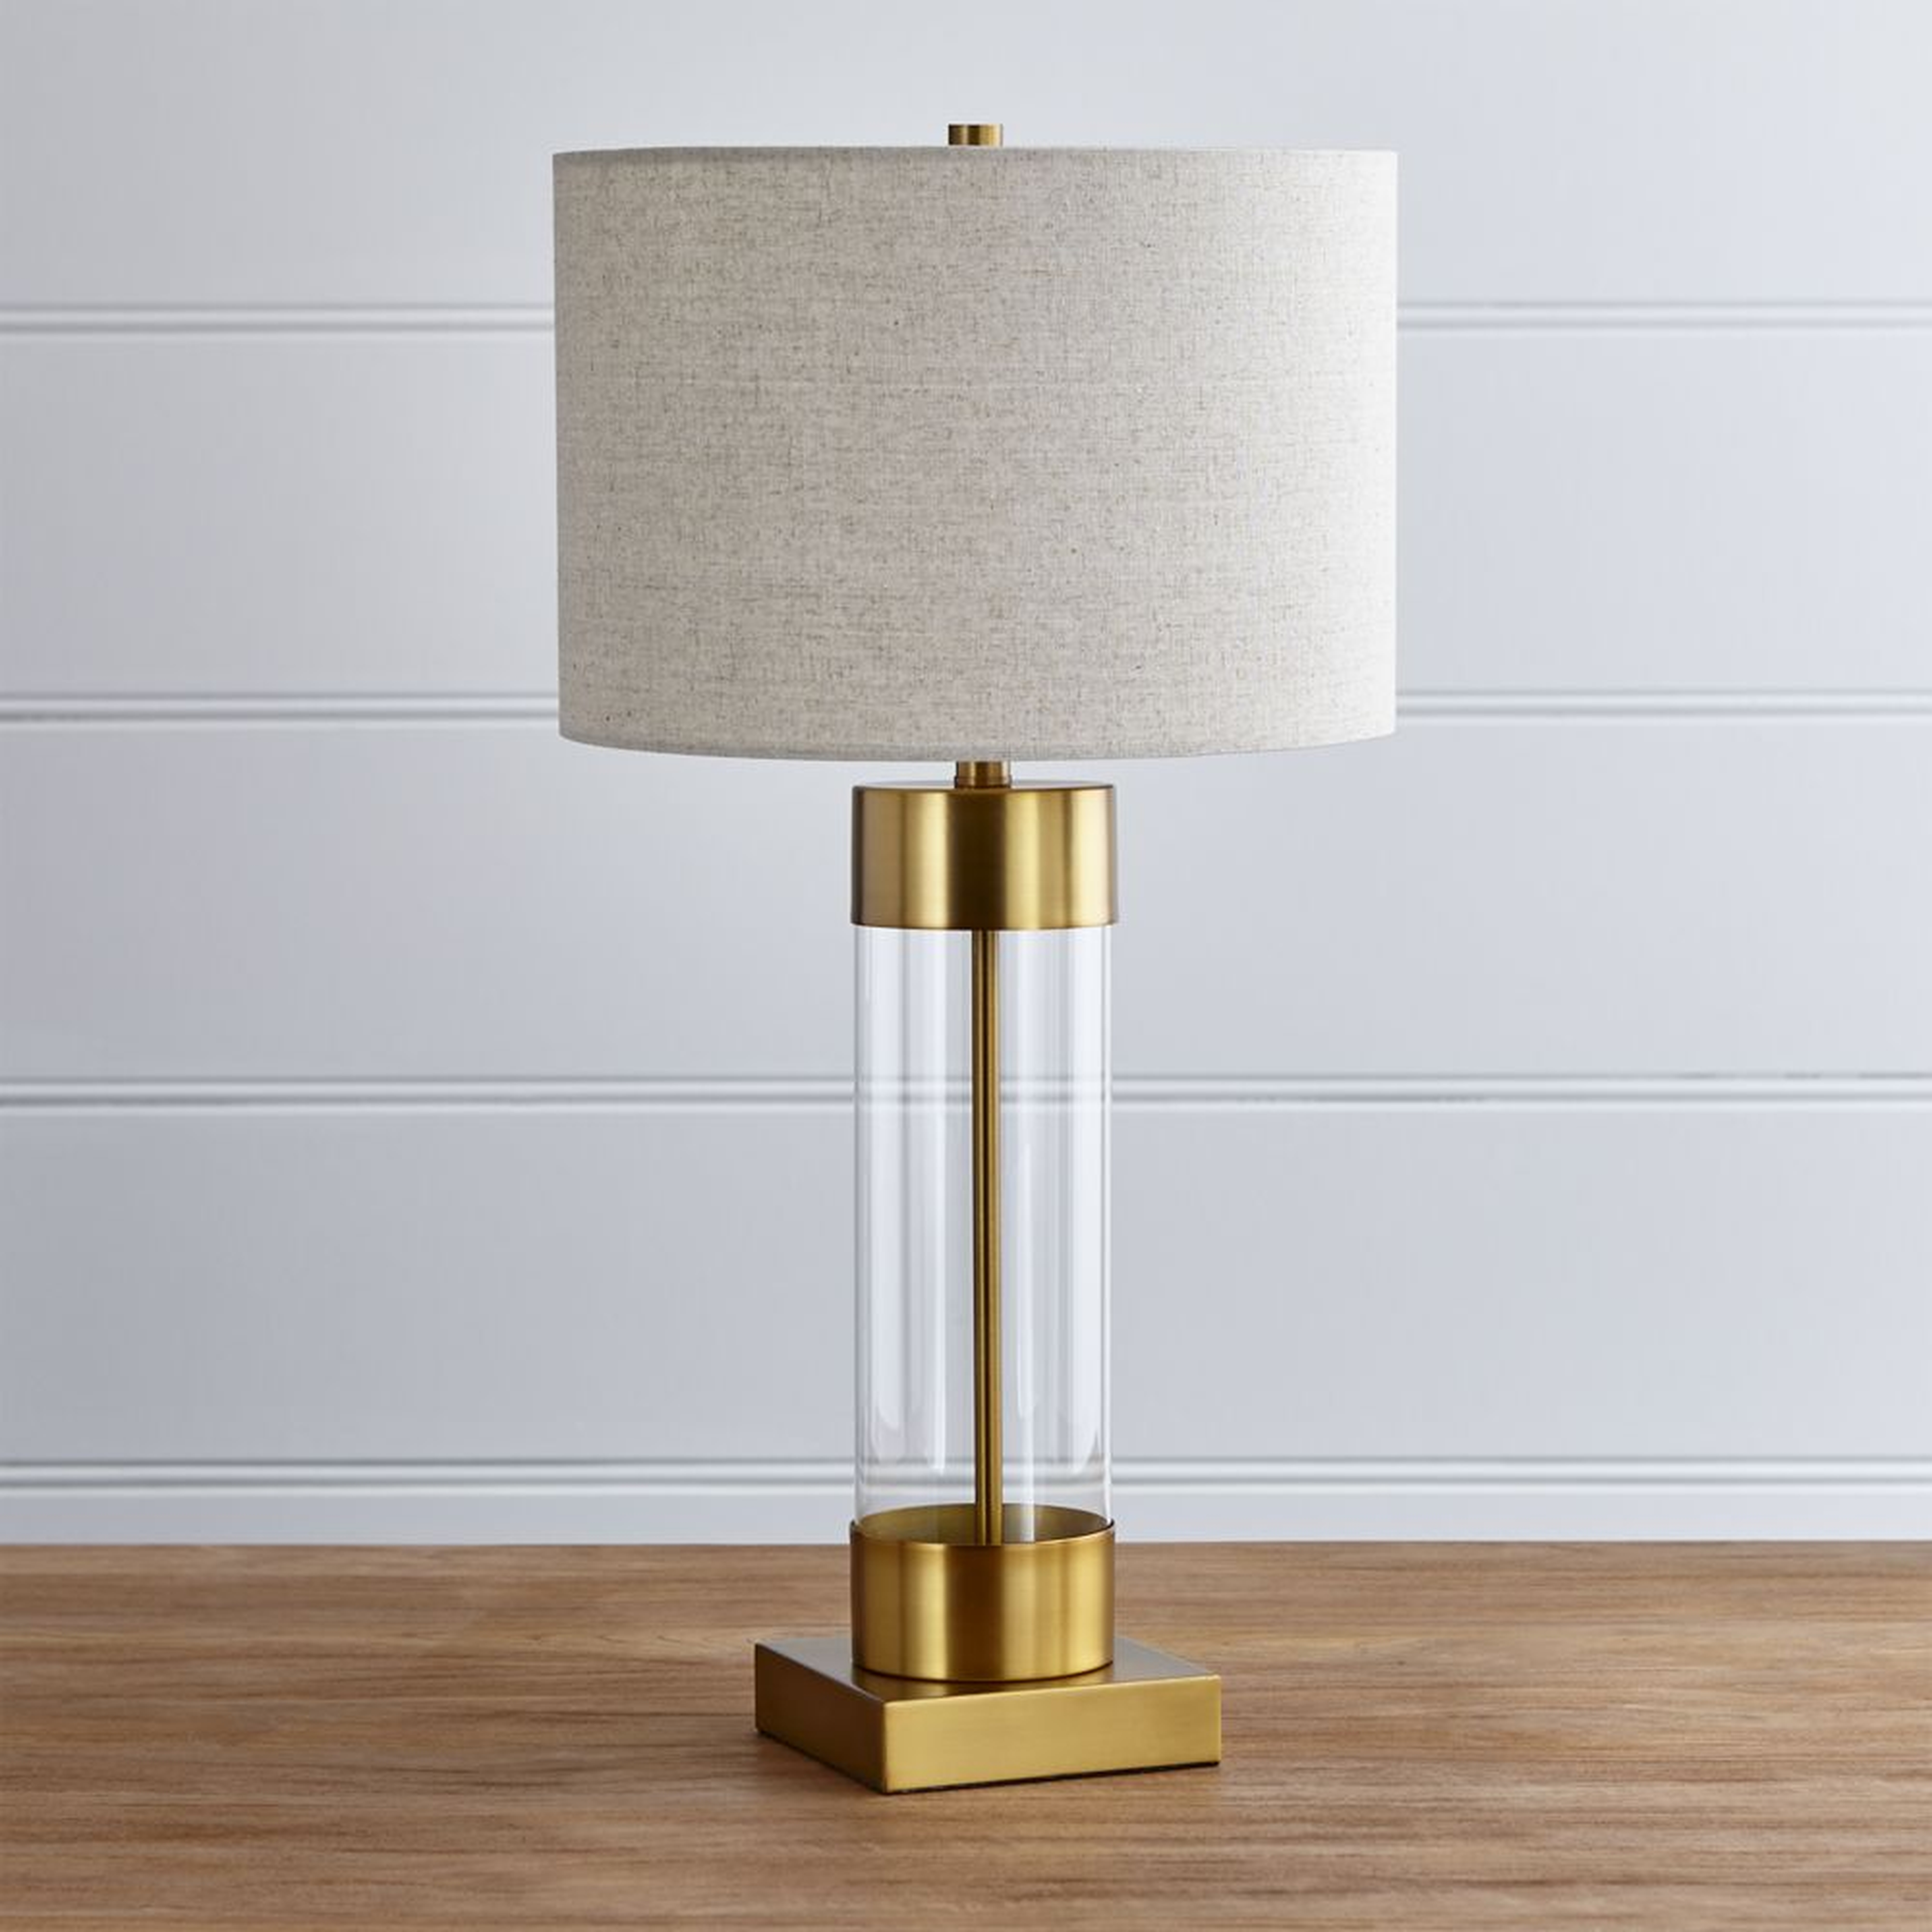 Avenue Brass Table Lamp with USB Port - Crate and Barrel